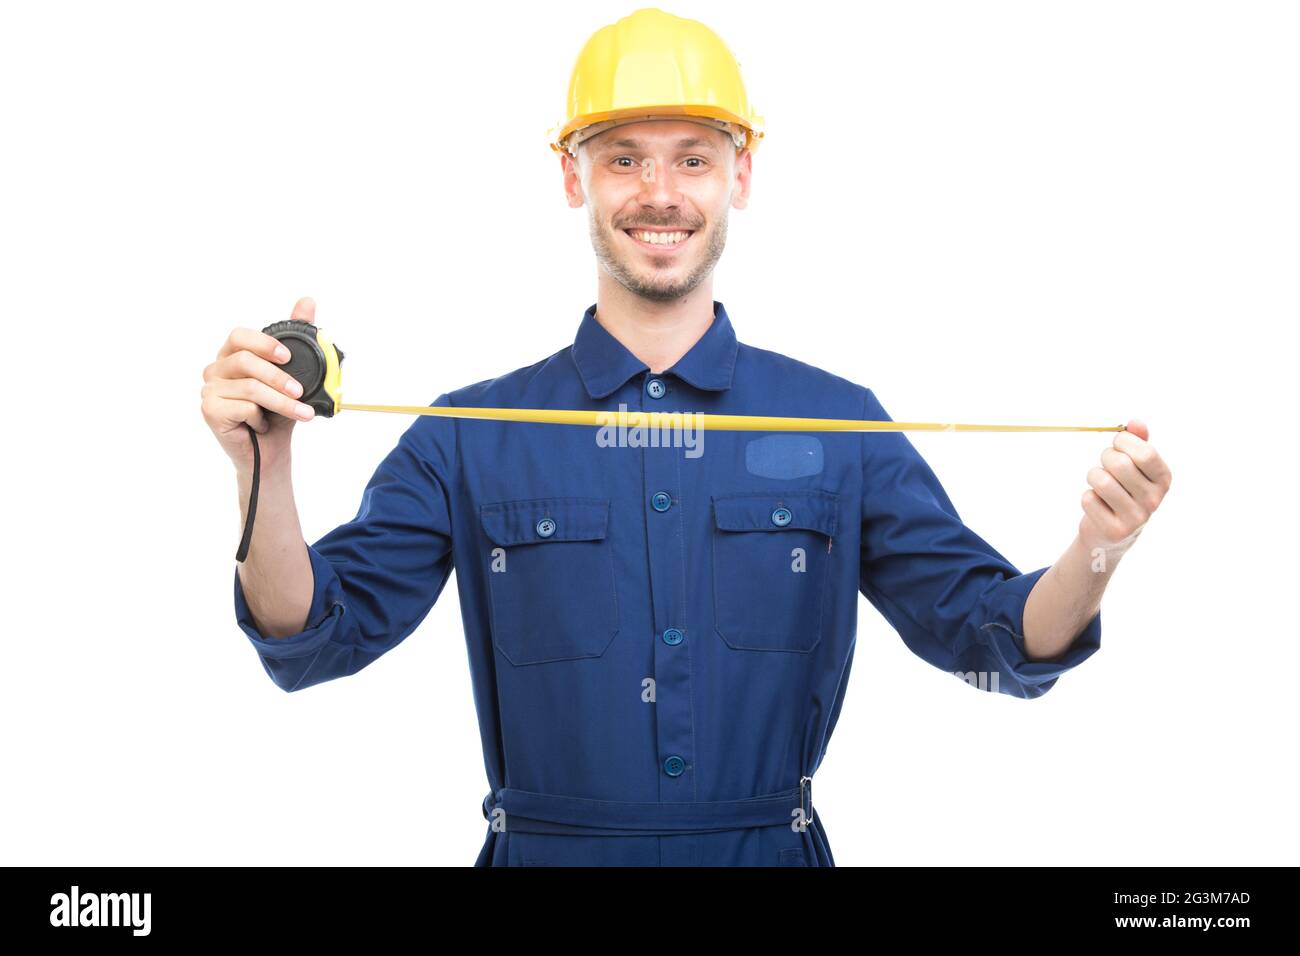 Horizontal portrait of successful handsome Caucasian construction engineer wearing uniform with hardhat measuring width or length of something Stock Photo